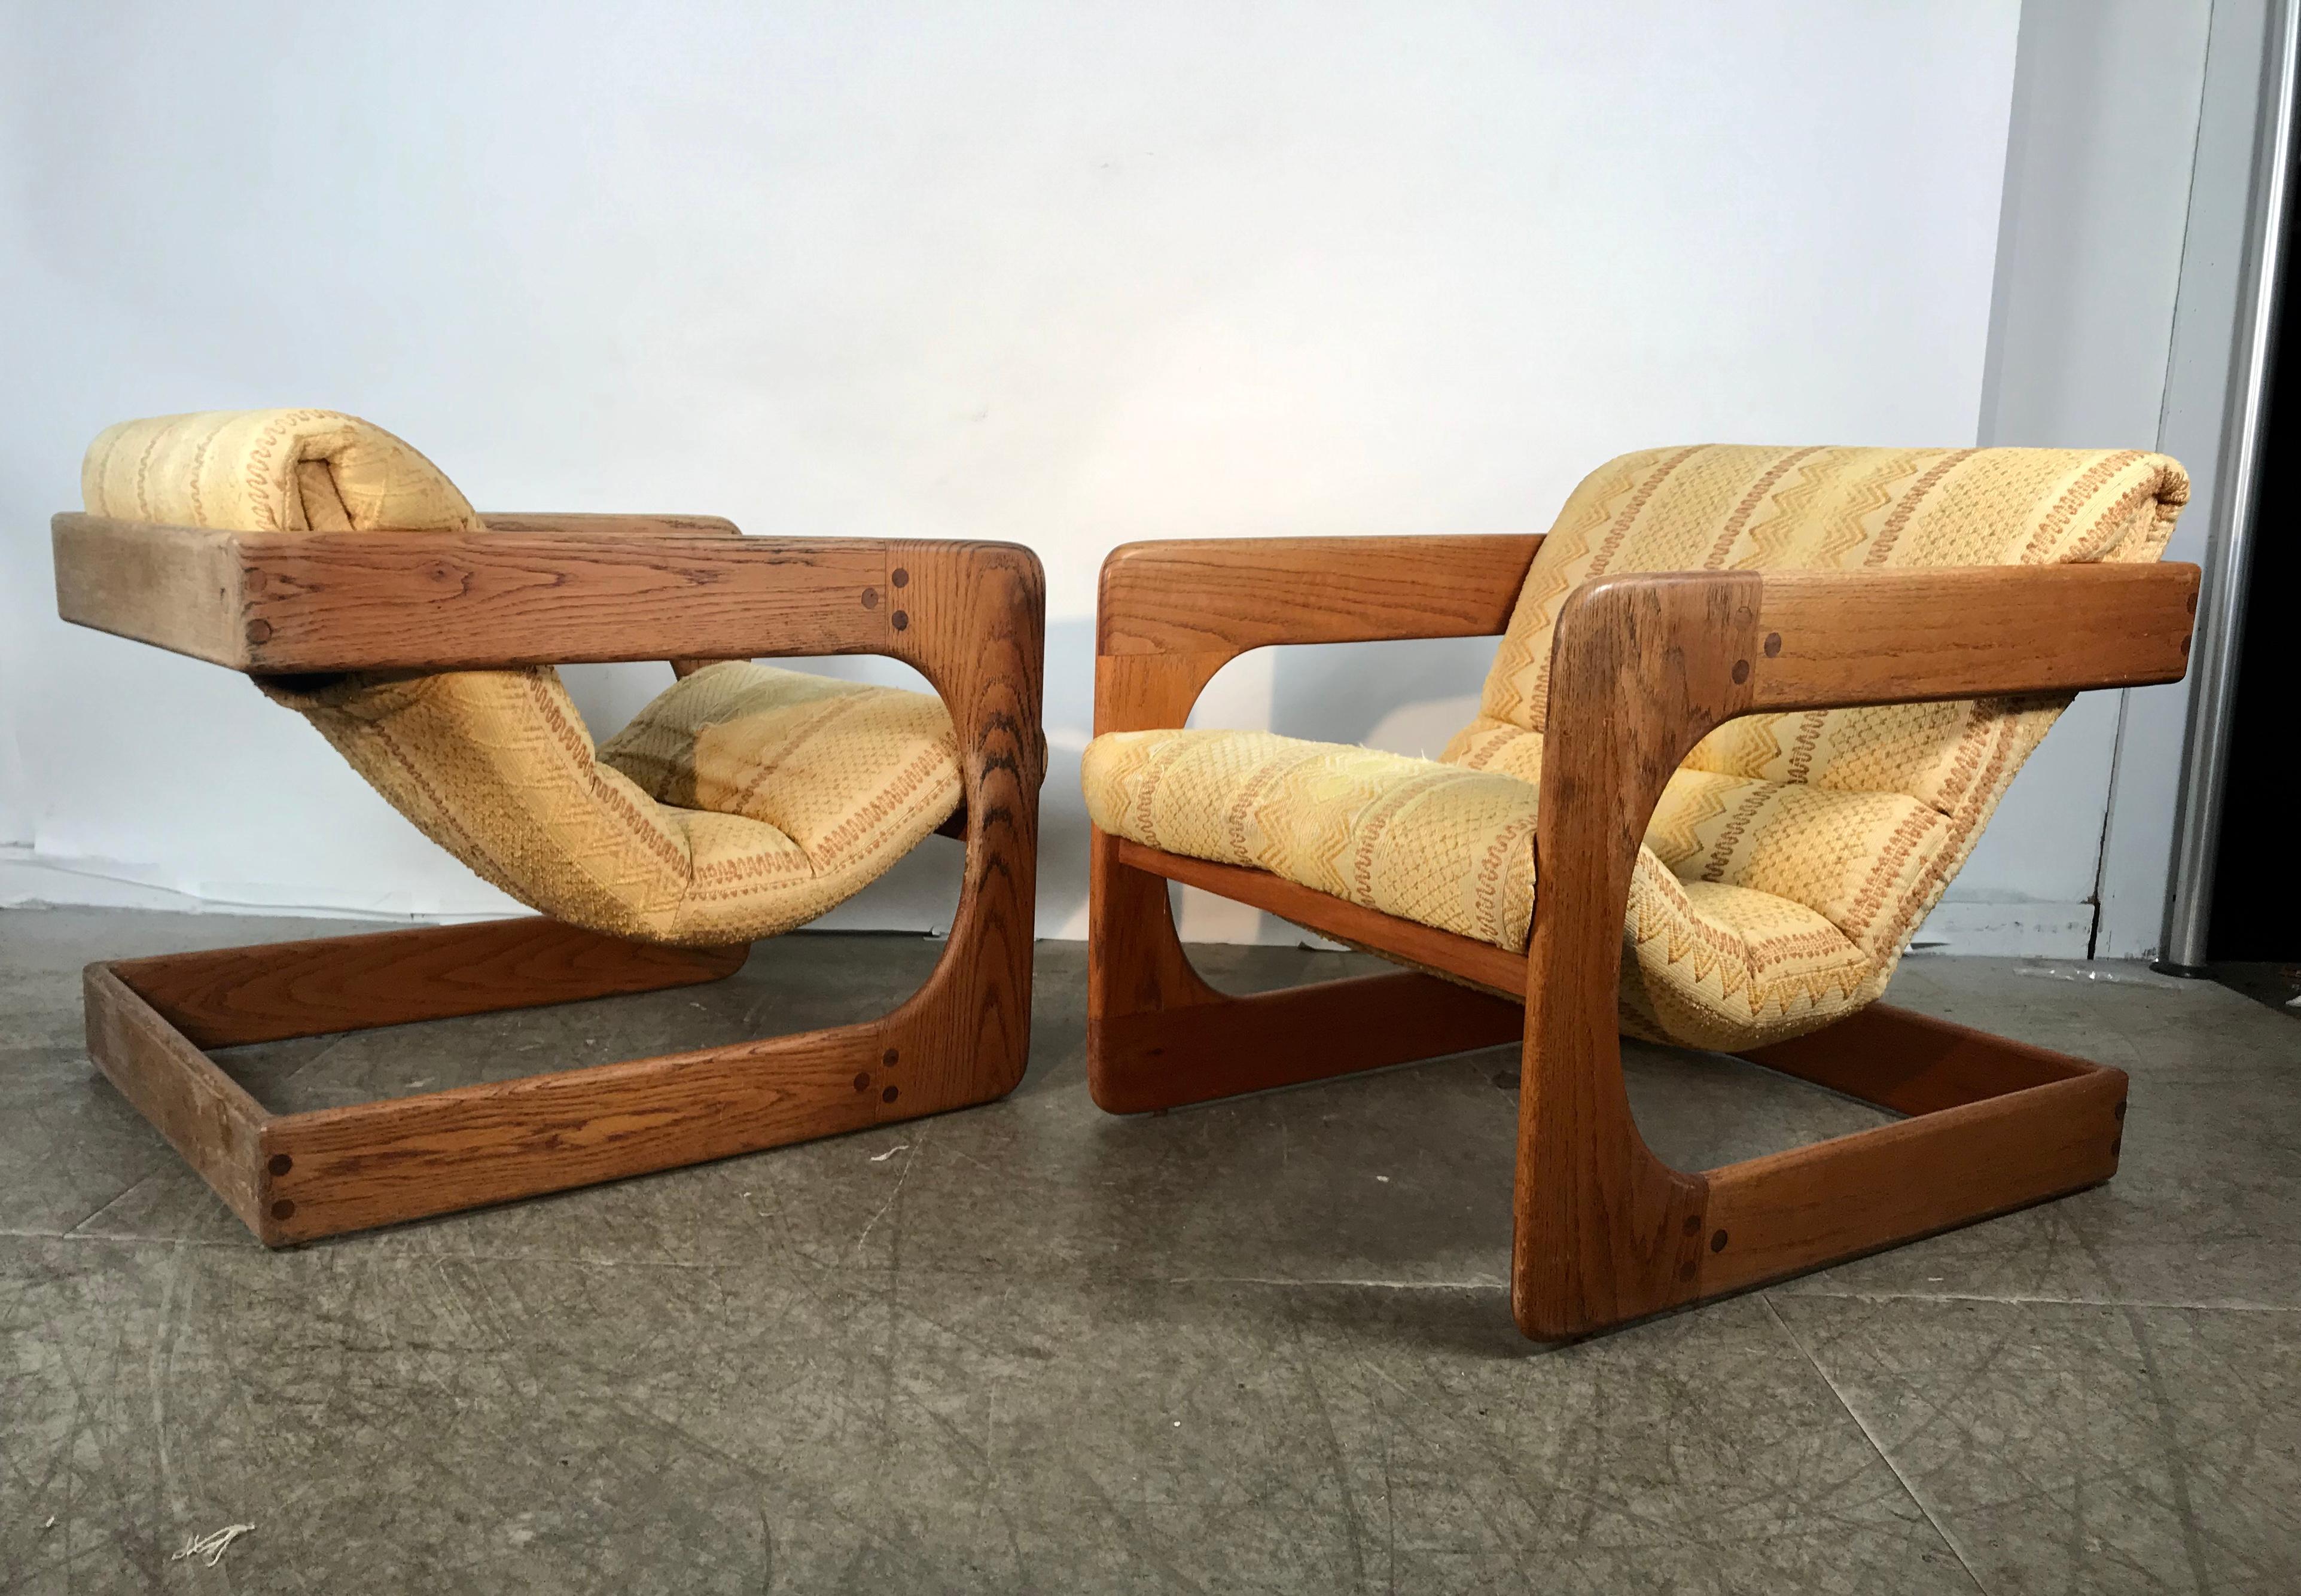 Classic pair of 1970s Cantilieved lounge chairs by Lou Hodges, California Design Group,, In original condition, Retain original pale yellow upholstery .age appropriate wear, minor tears, solid oakwood frames also original condition, bumps and